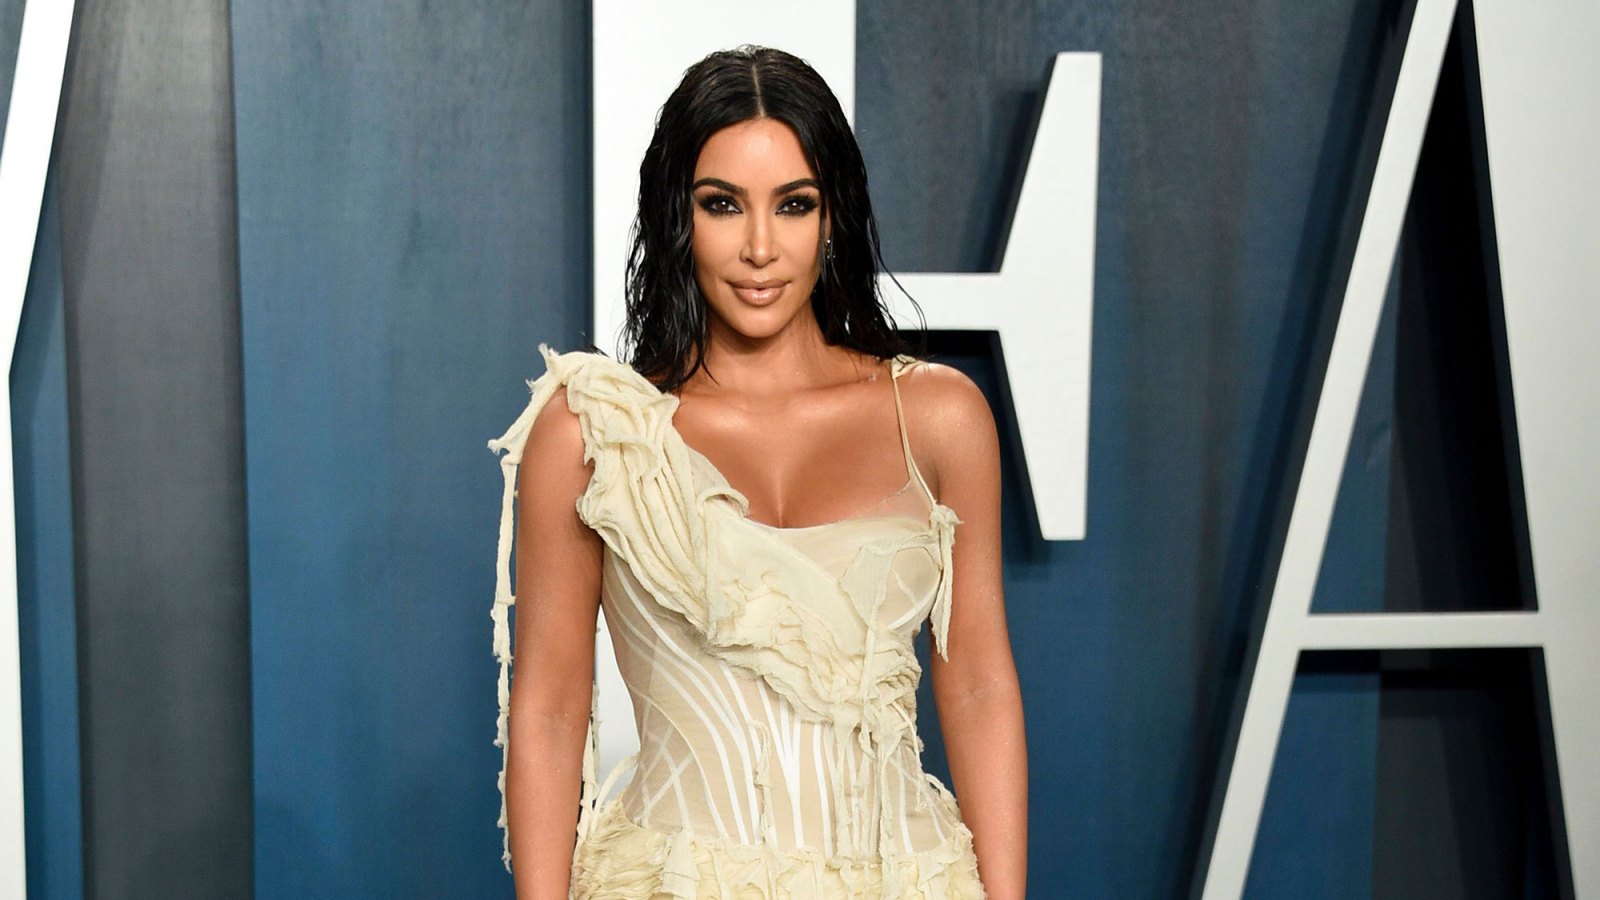 Kim Kardashian Seemingly Hints That Filming for New Reality Show Has Already Started Following the End of 'Keeping Up With the Kardashians'